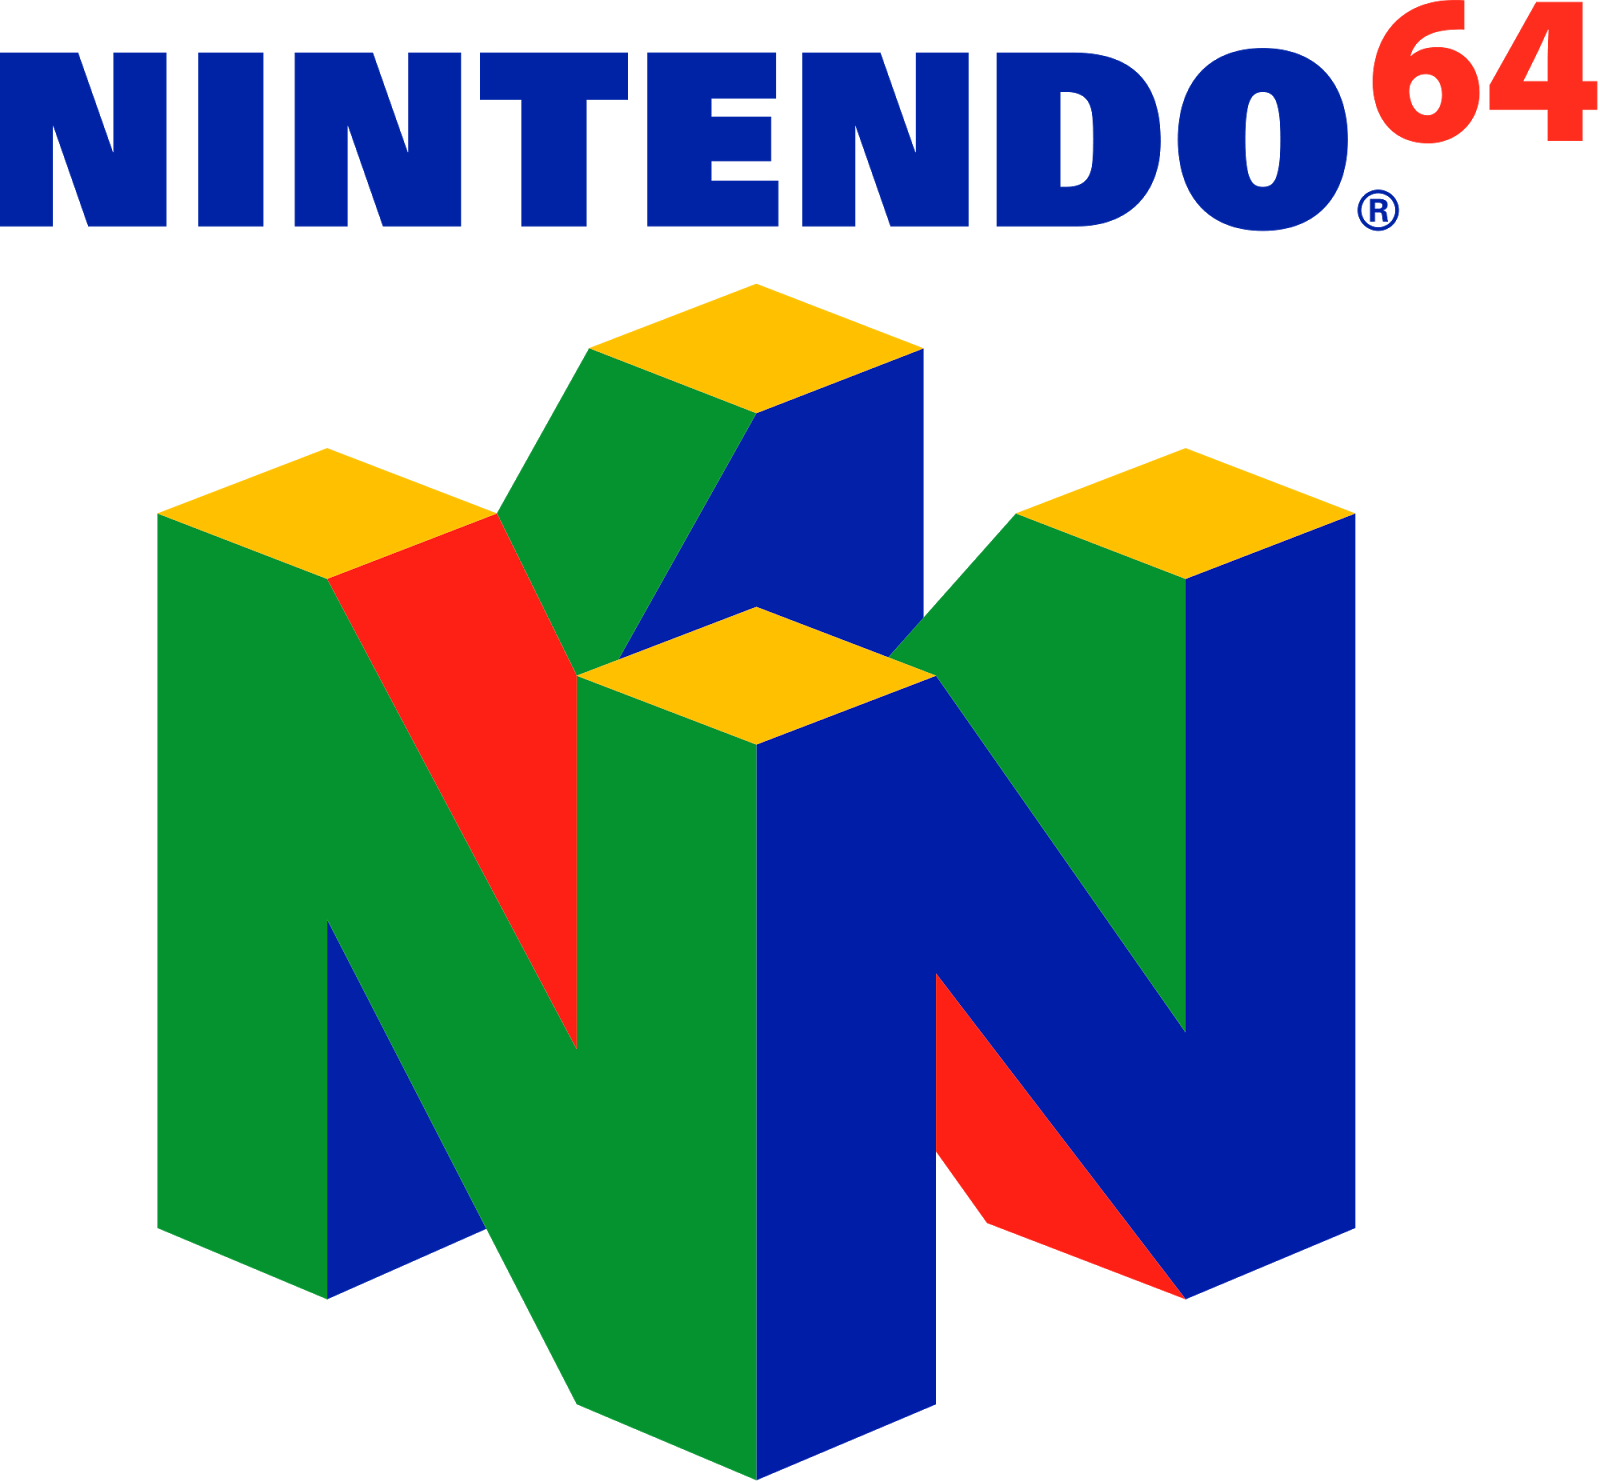 Ultra Torrent Nintendo 64 Games Collection [276 + Project64 1.7